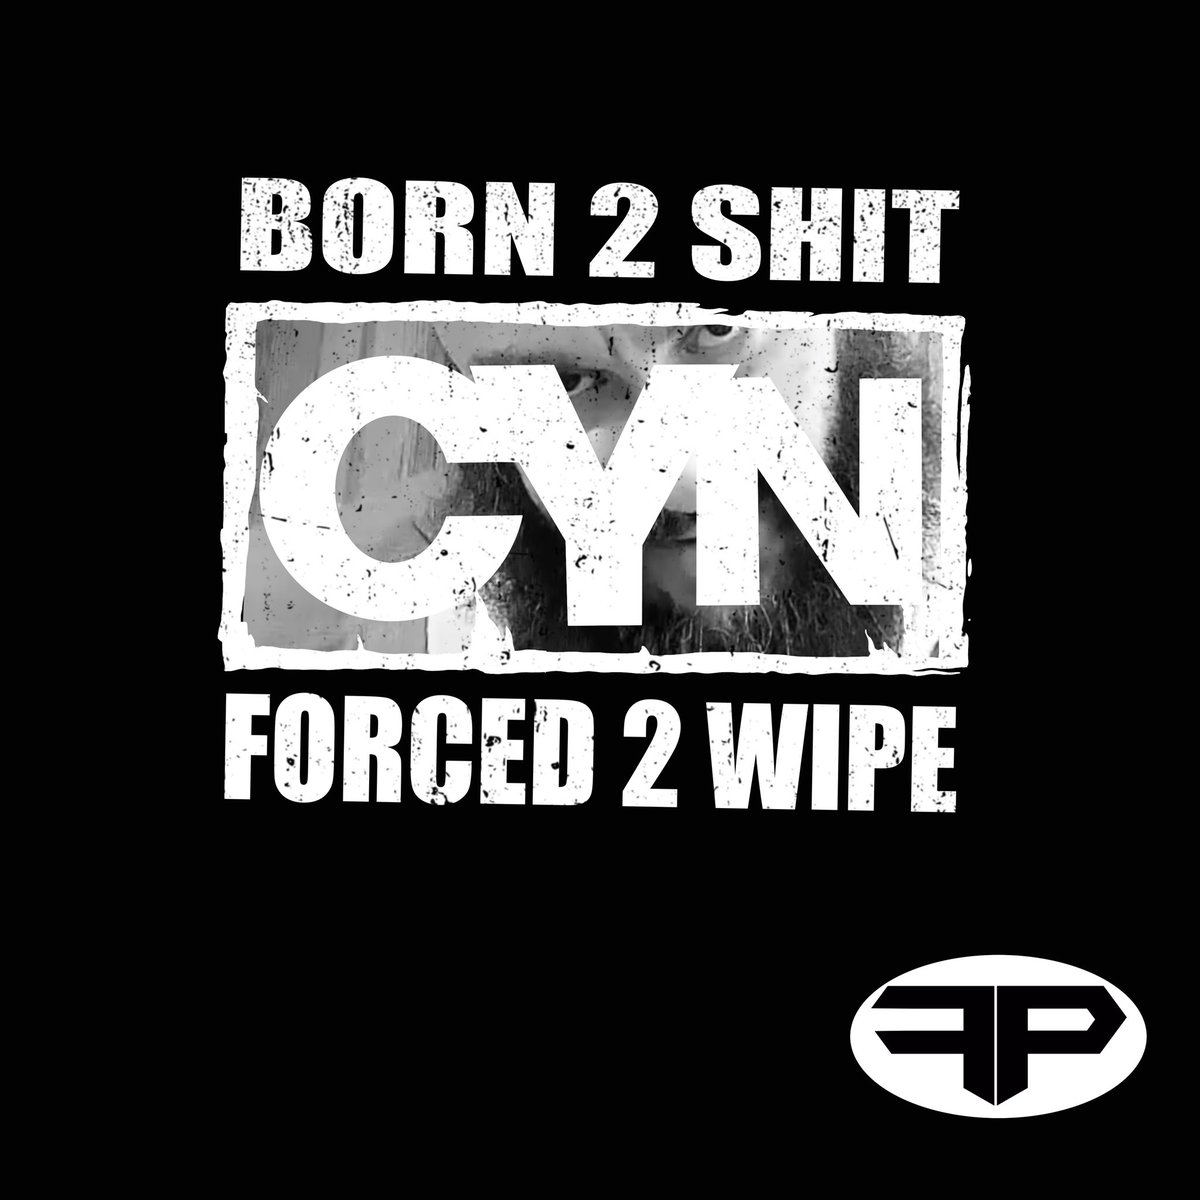 RT @FadedPlagueArt: Y’all see the new CYN shirt? Fire. 

#notreal #yerrmom https://t.co/Nbg1iX750g